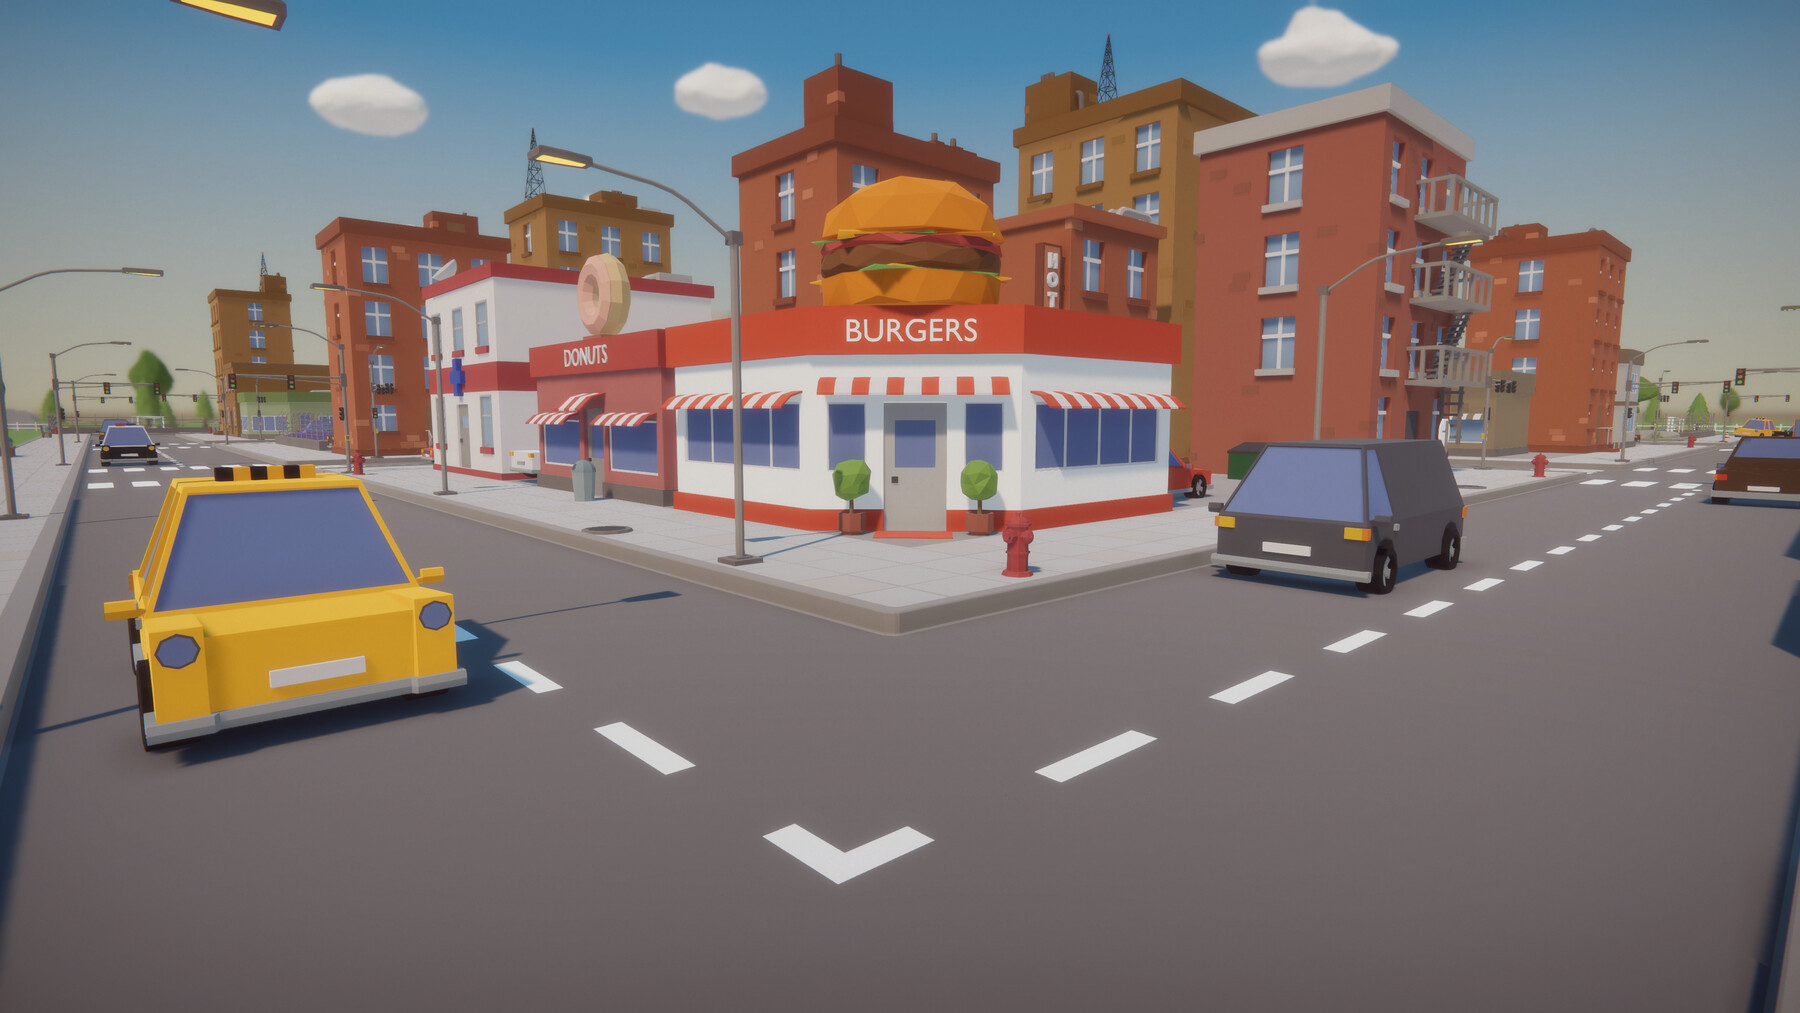 ArtStation - Low Poly Cartoon City - Asset for Unity 3D, Map and Models ...